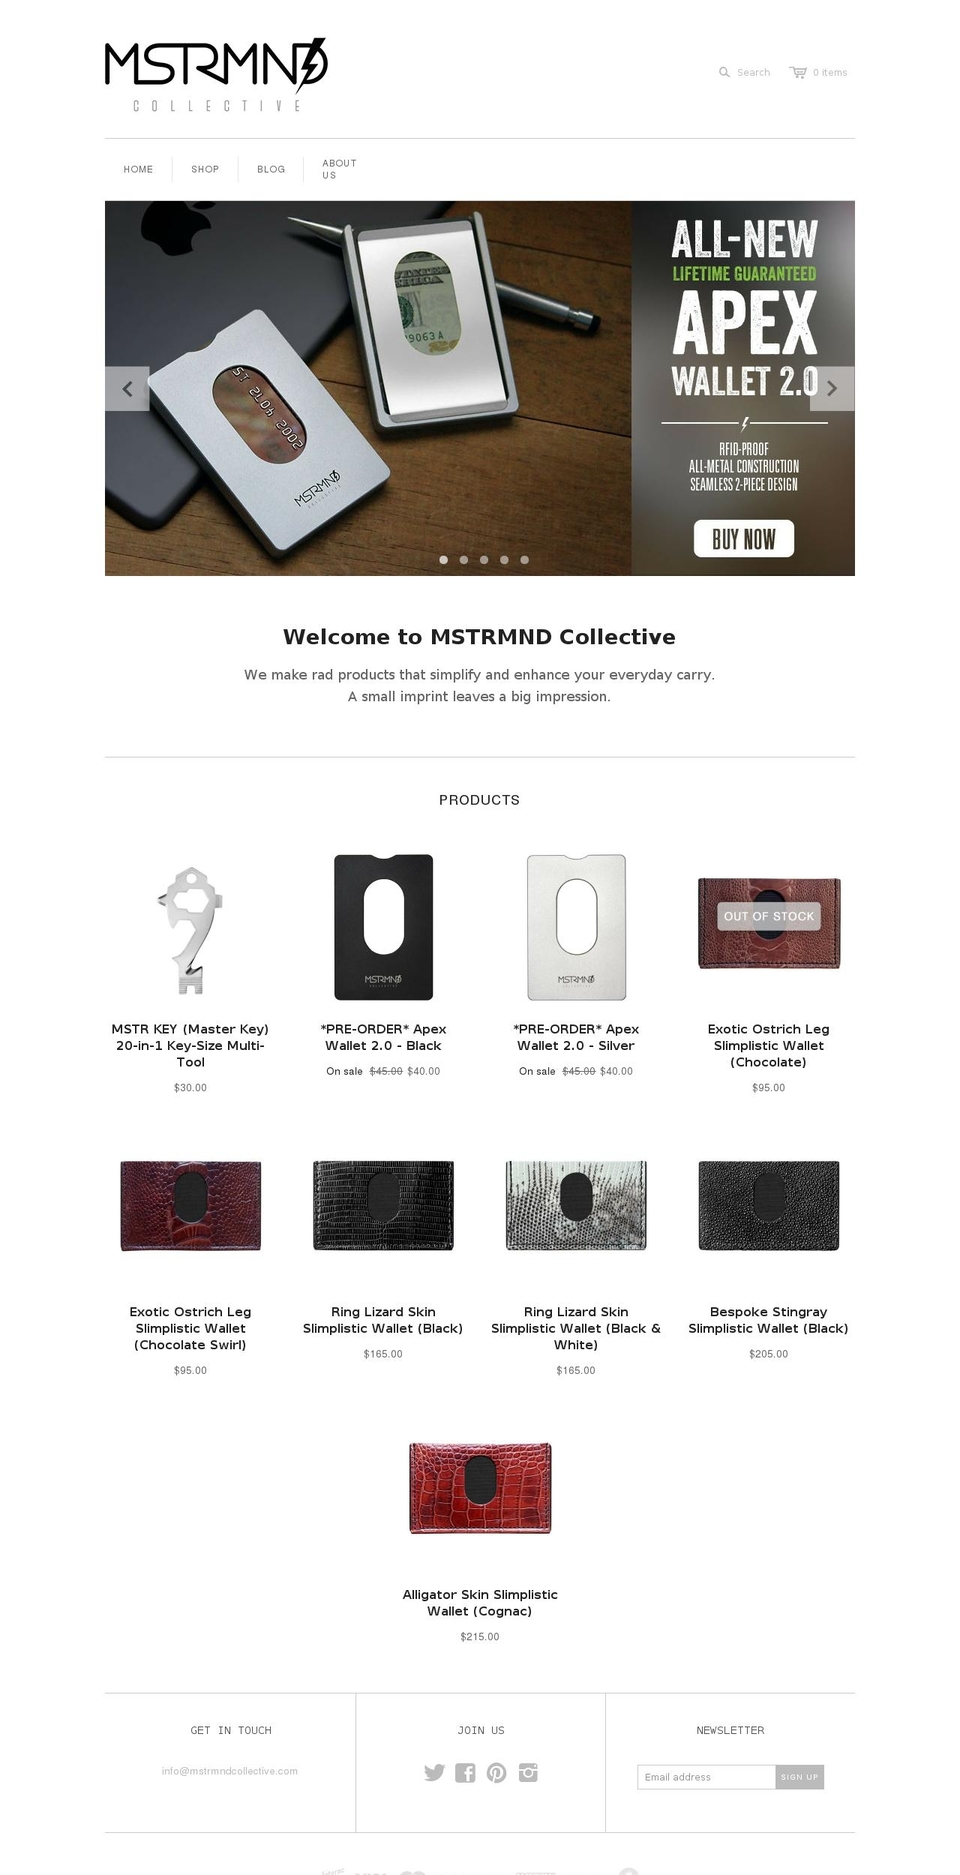 Atlantic Shopify theme site example mstrmndcollective.com